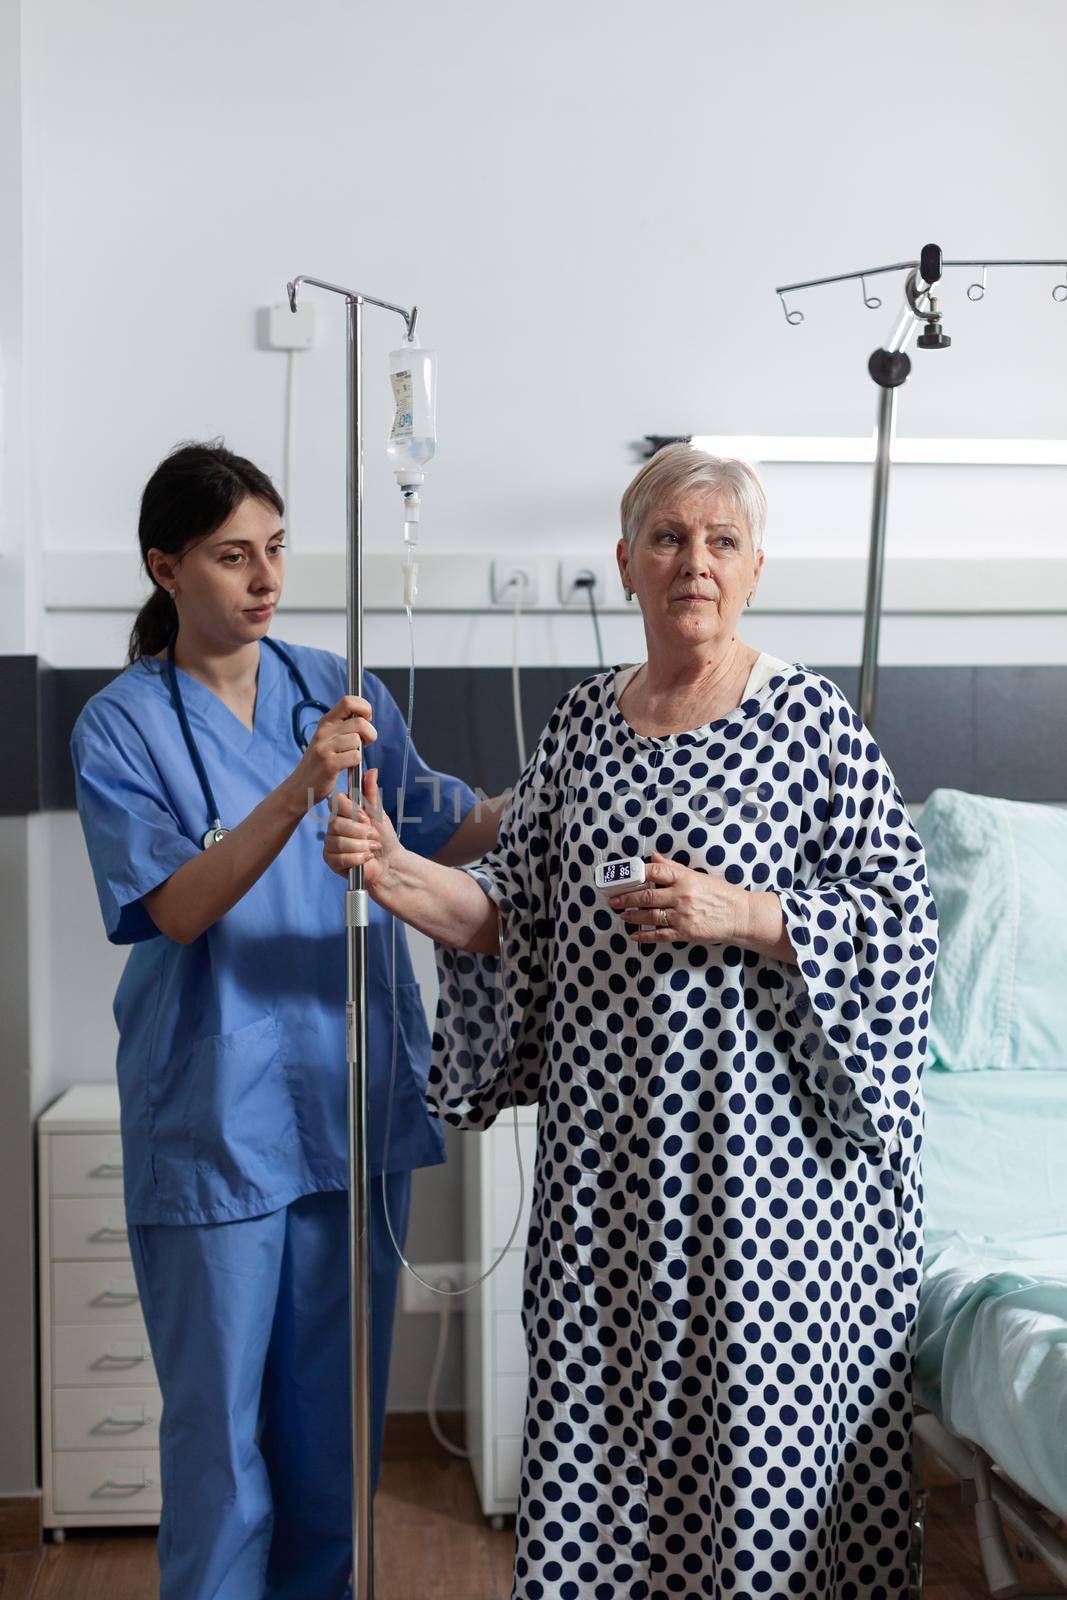 Nurse dressed with scrubs helping senior woman patient with iv drip bag attached while getting intravenous medicine. Pensioner with oxymeter on finger.